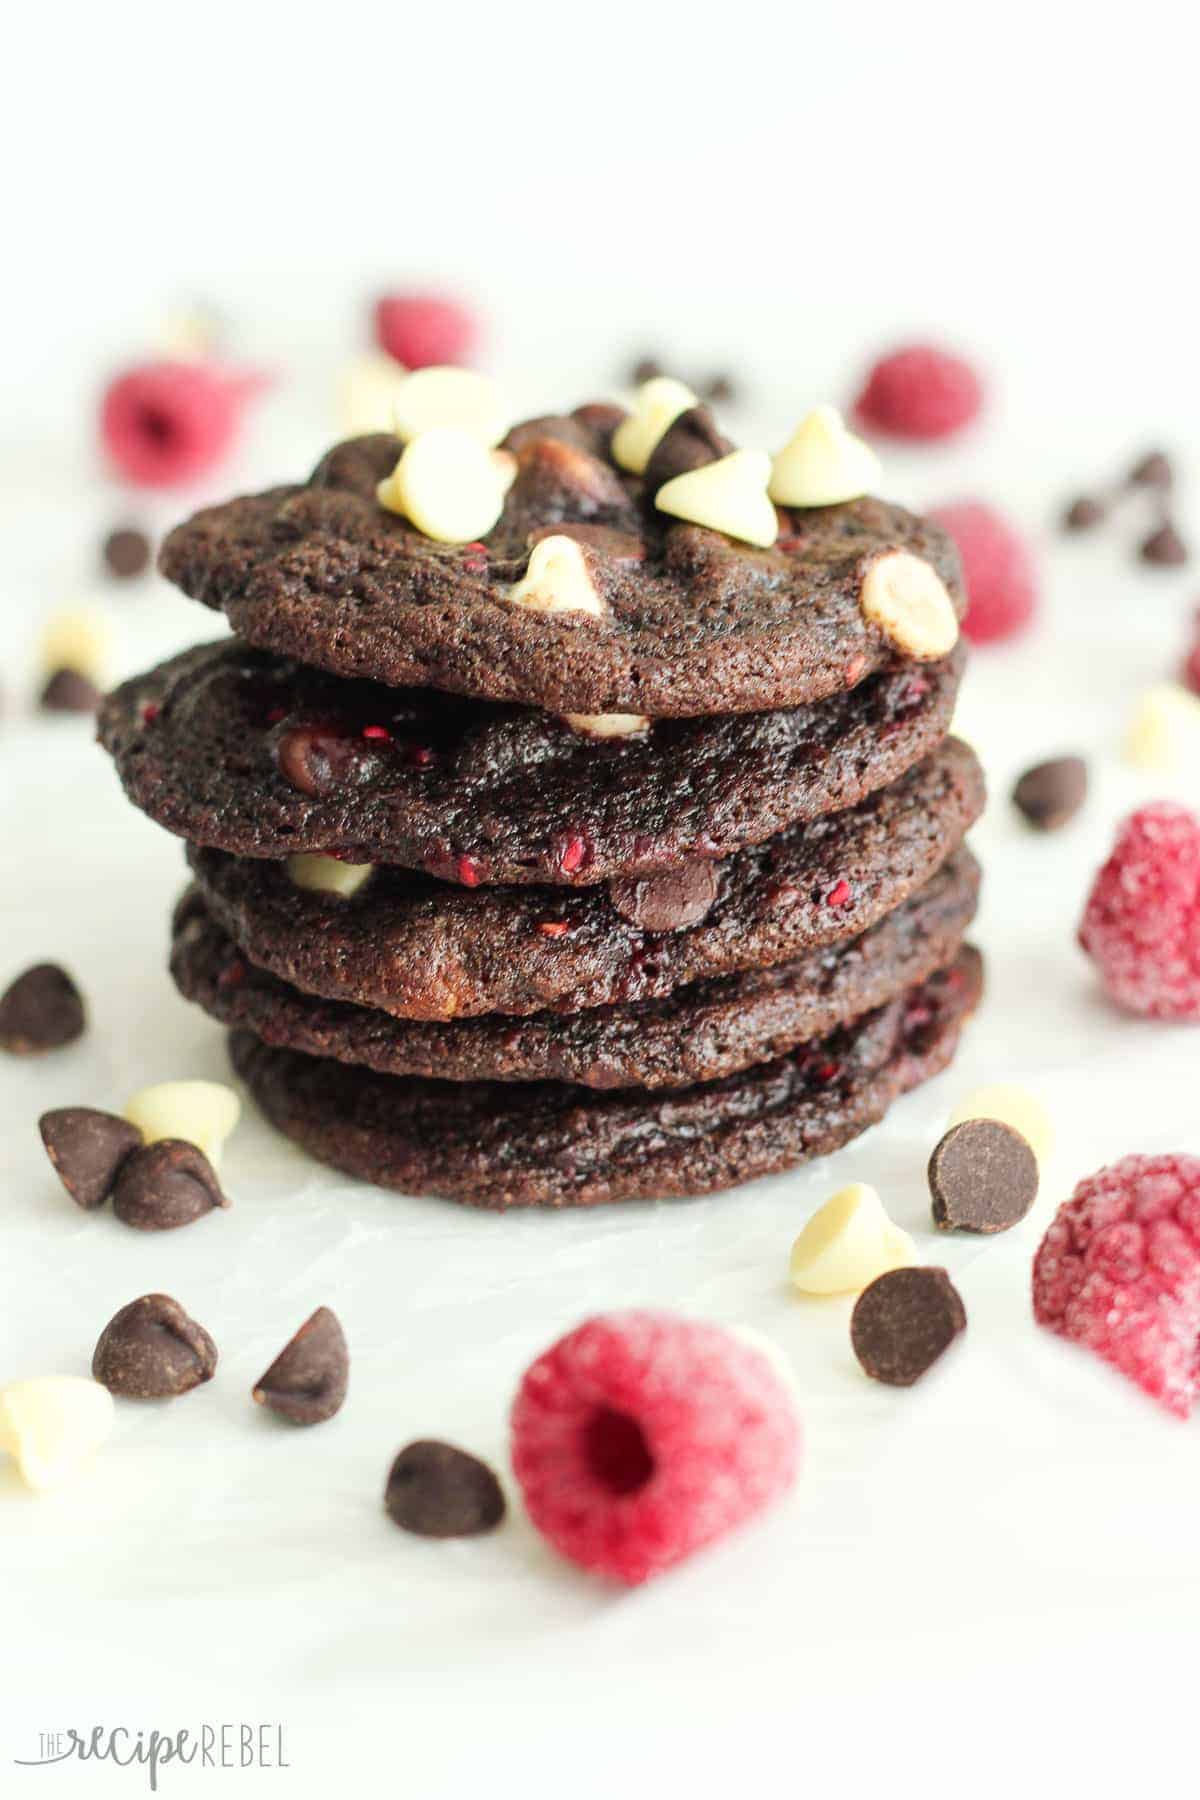 stack of five triple chocolate raspberry cookies with white chocolate and dark chocolate chips